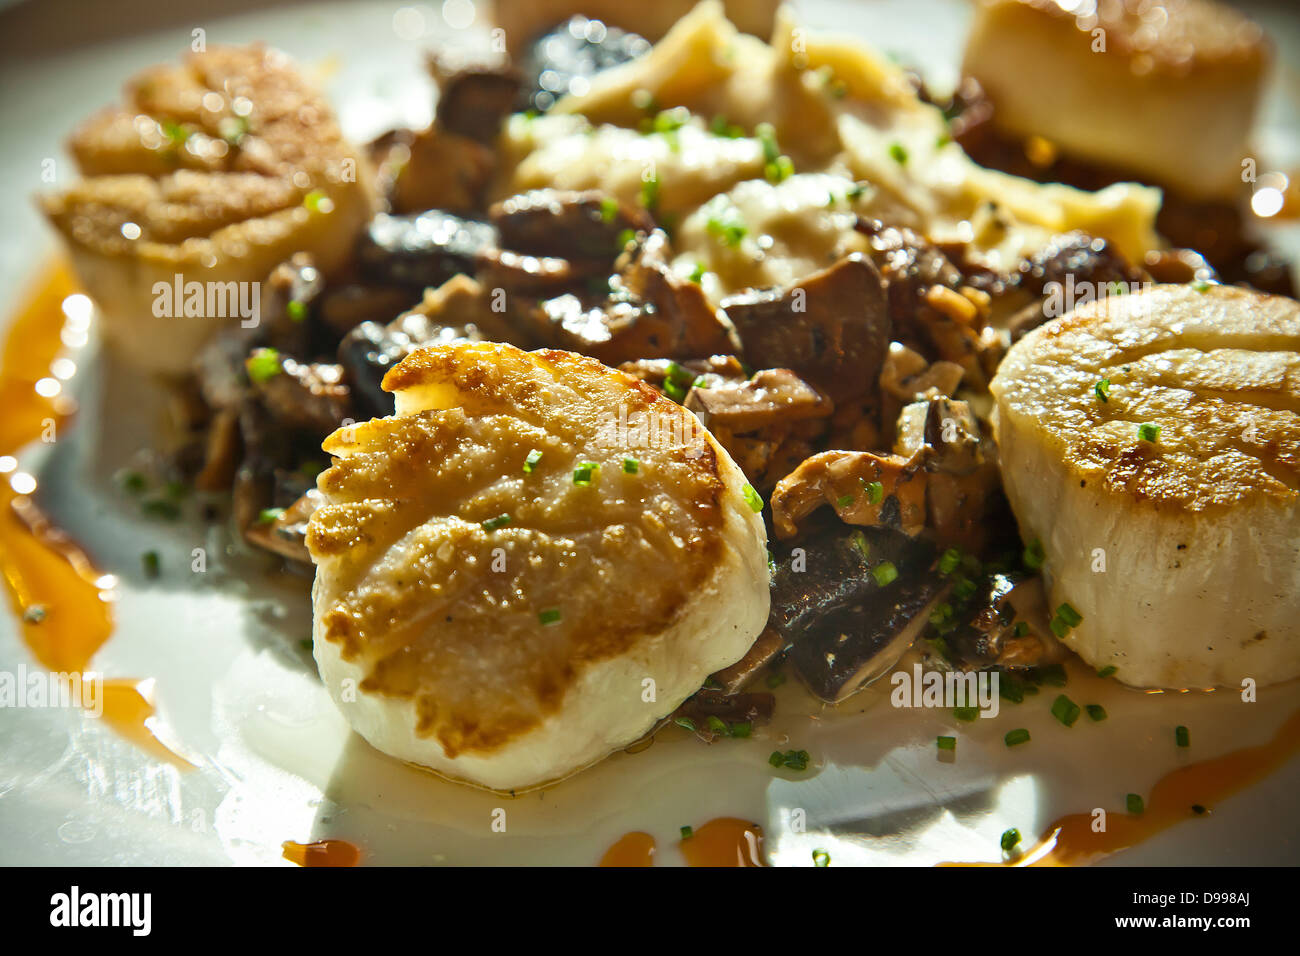 seared scallops on a dinner plate with mashed potatoes Stock Photo